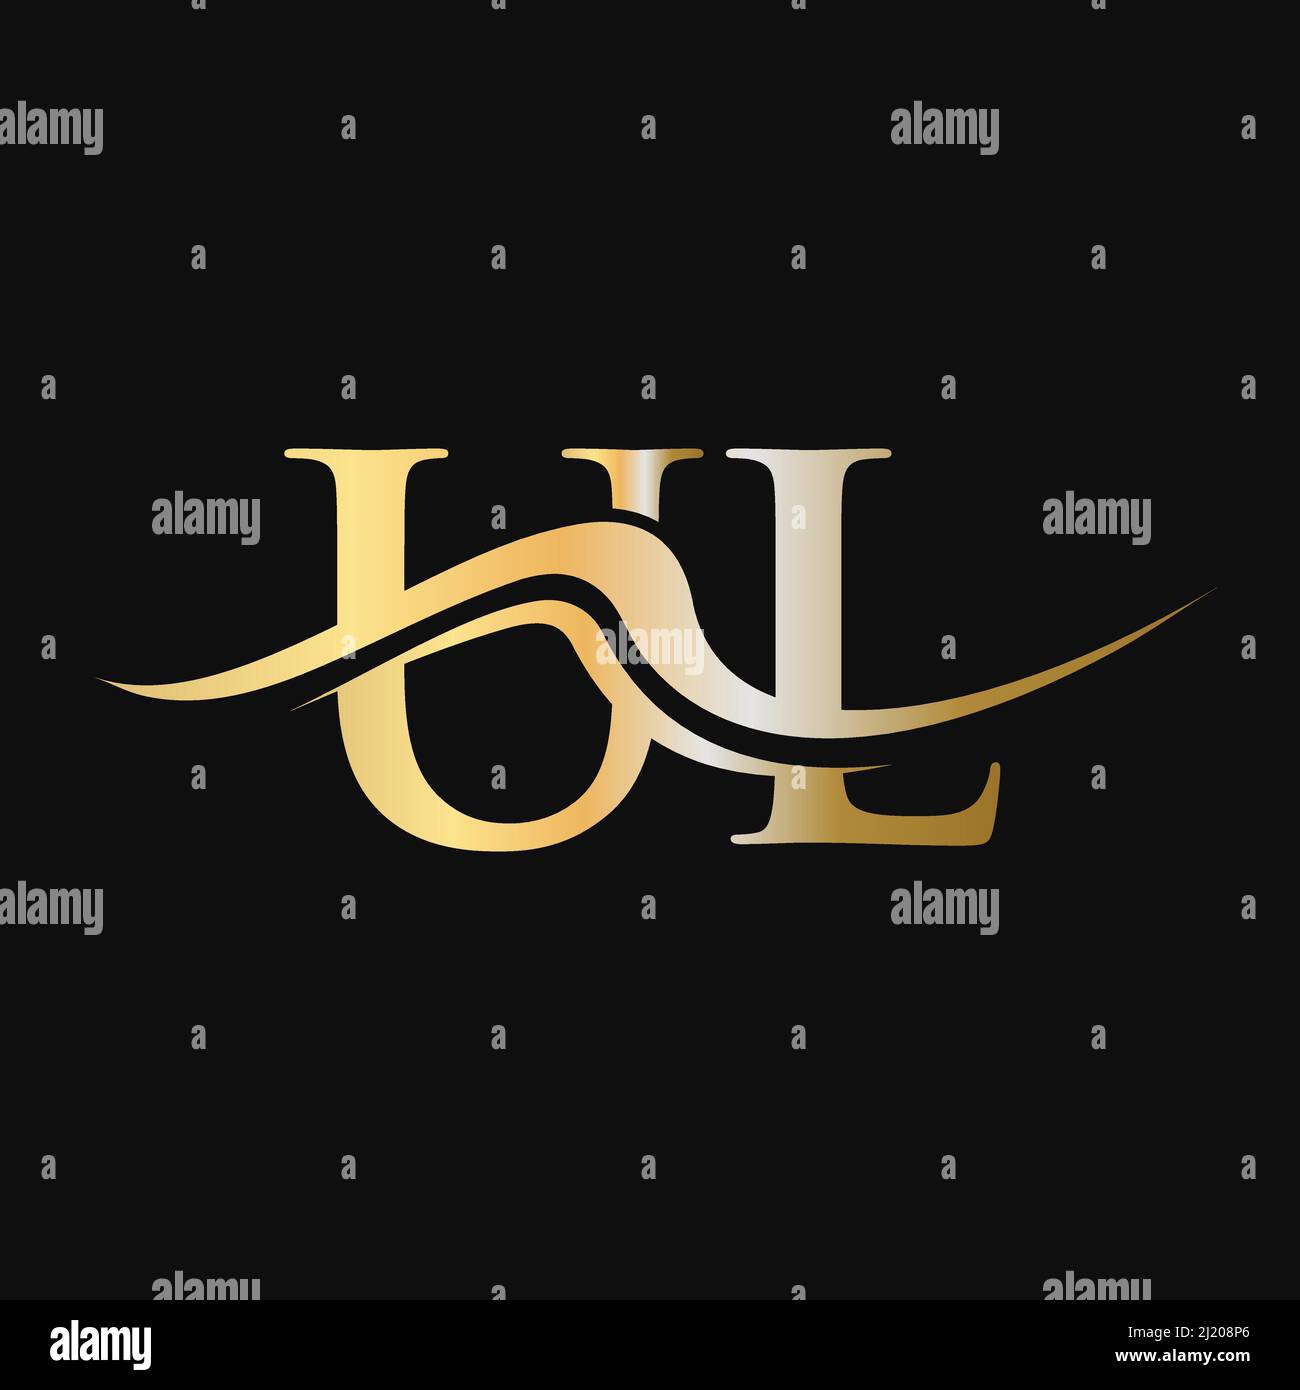 Letter UL Logo Design. Initial UL Logotype Template For Business And ...